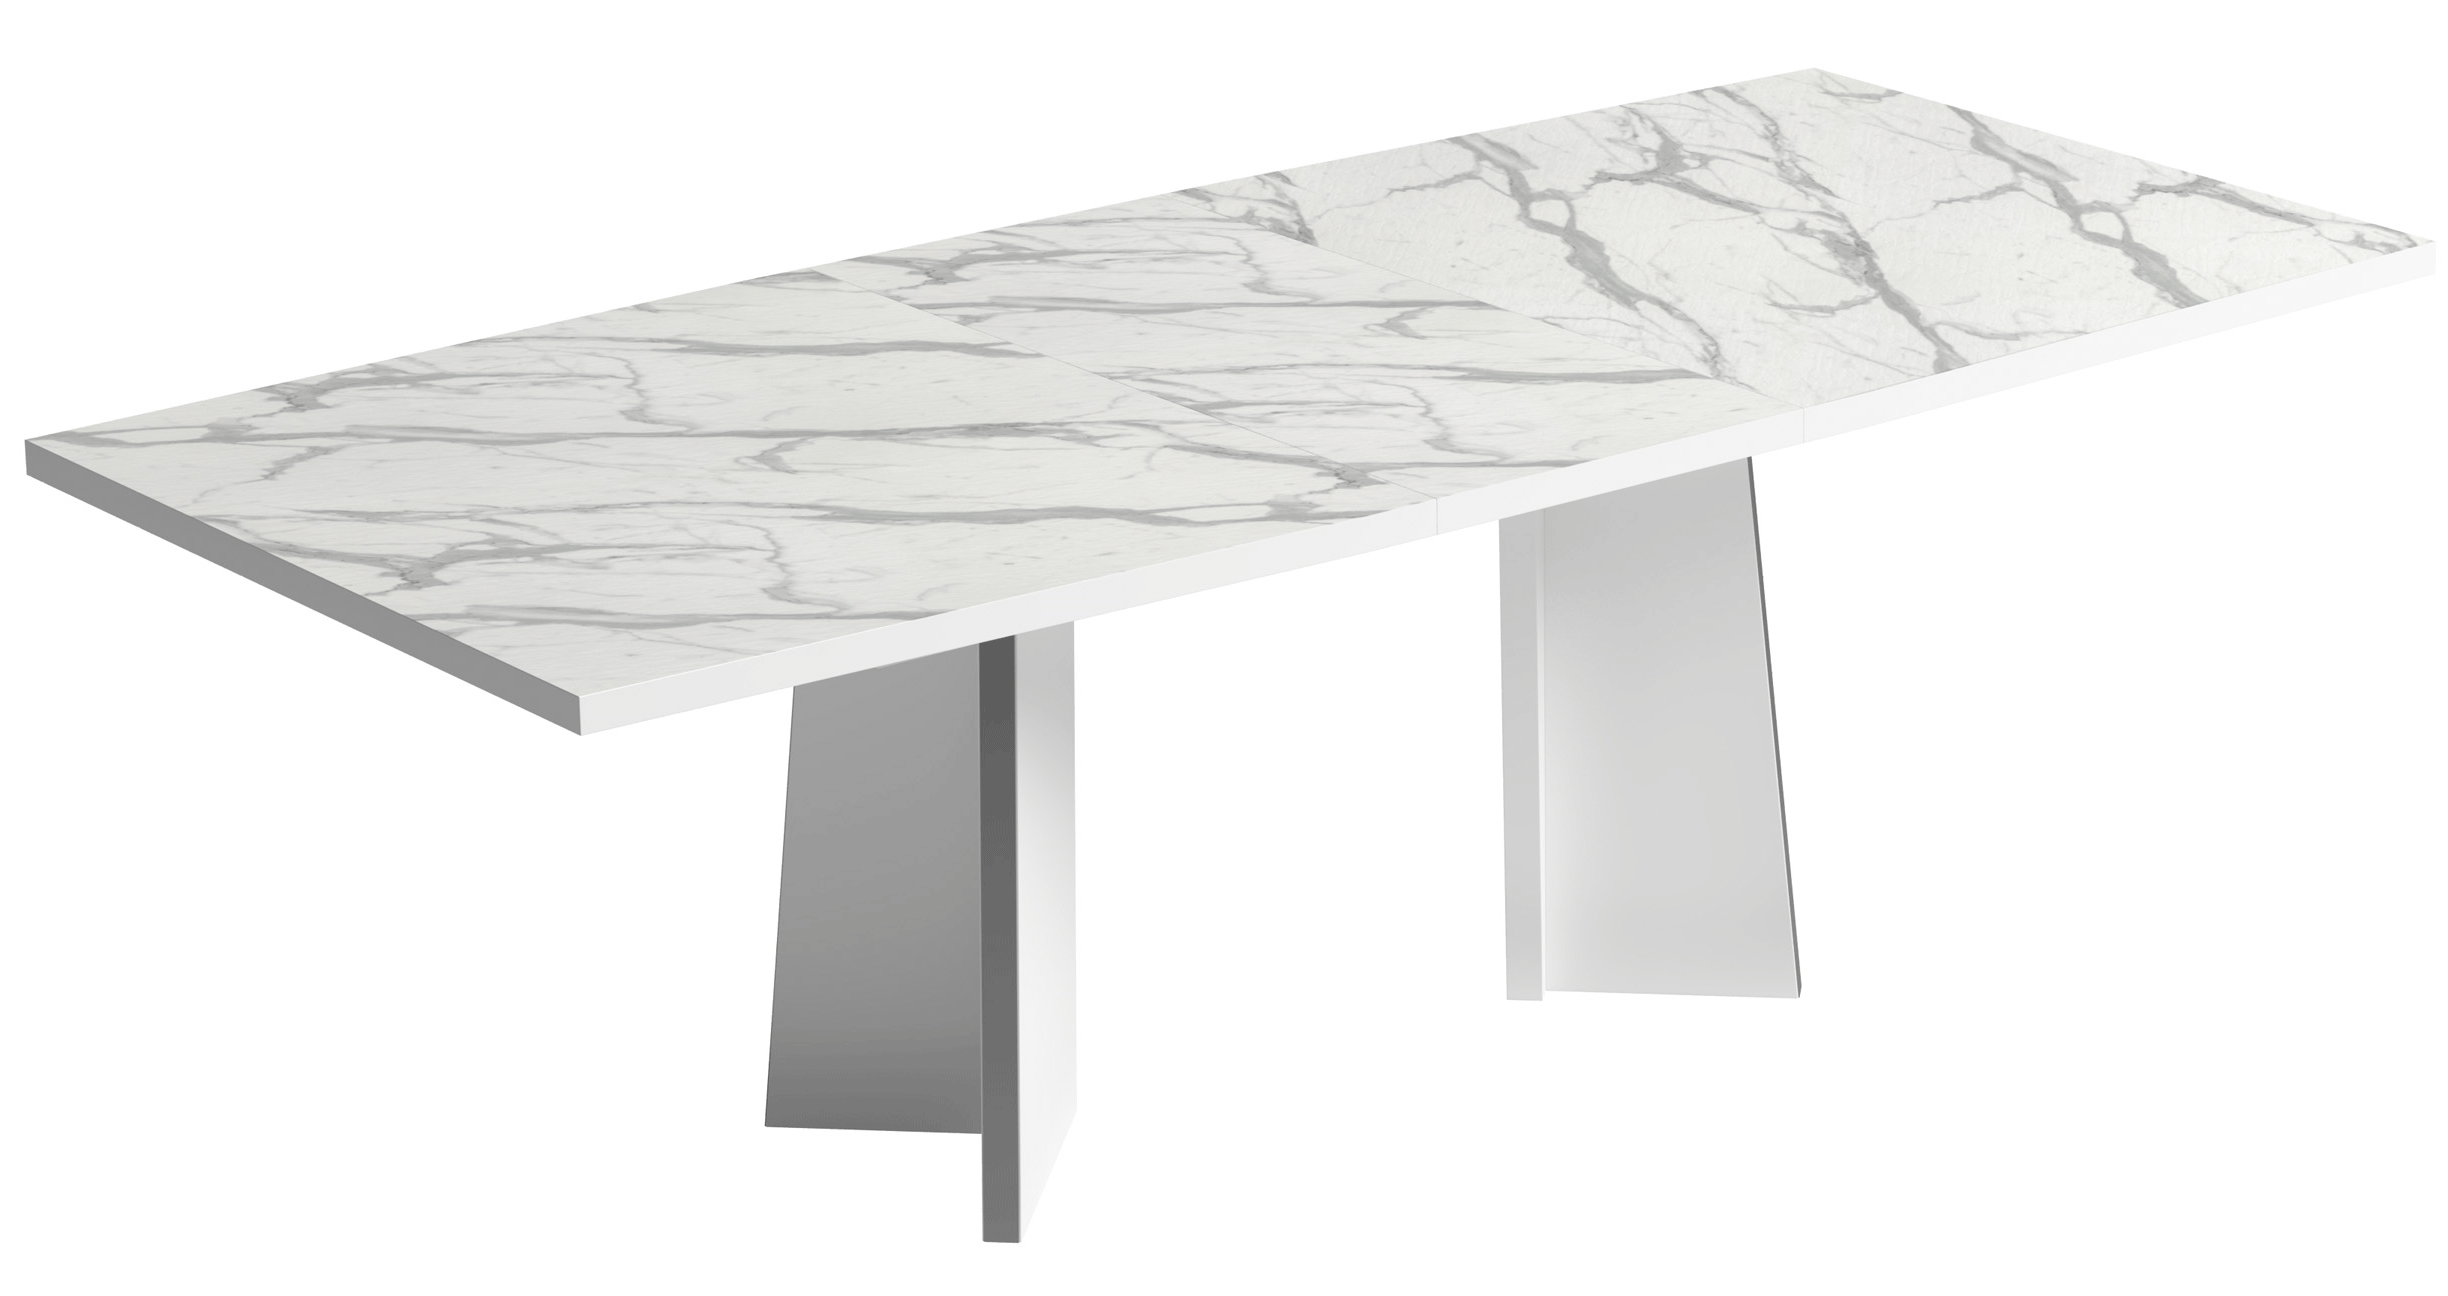 Dining Room Furniture Tables Carrara Dining Table